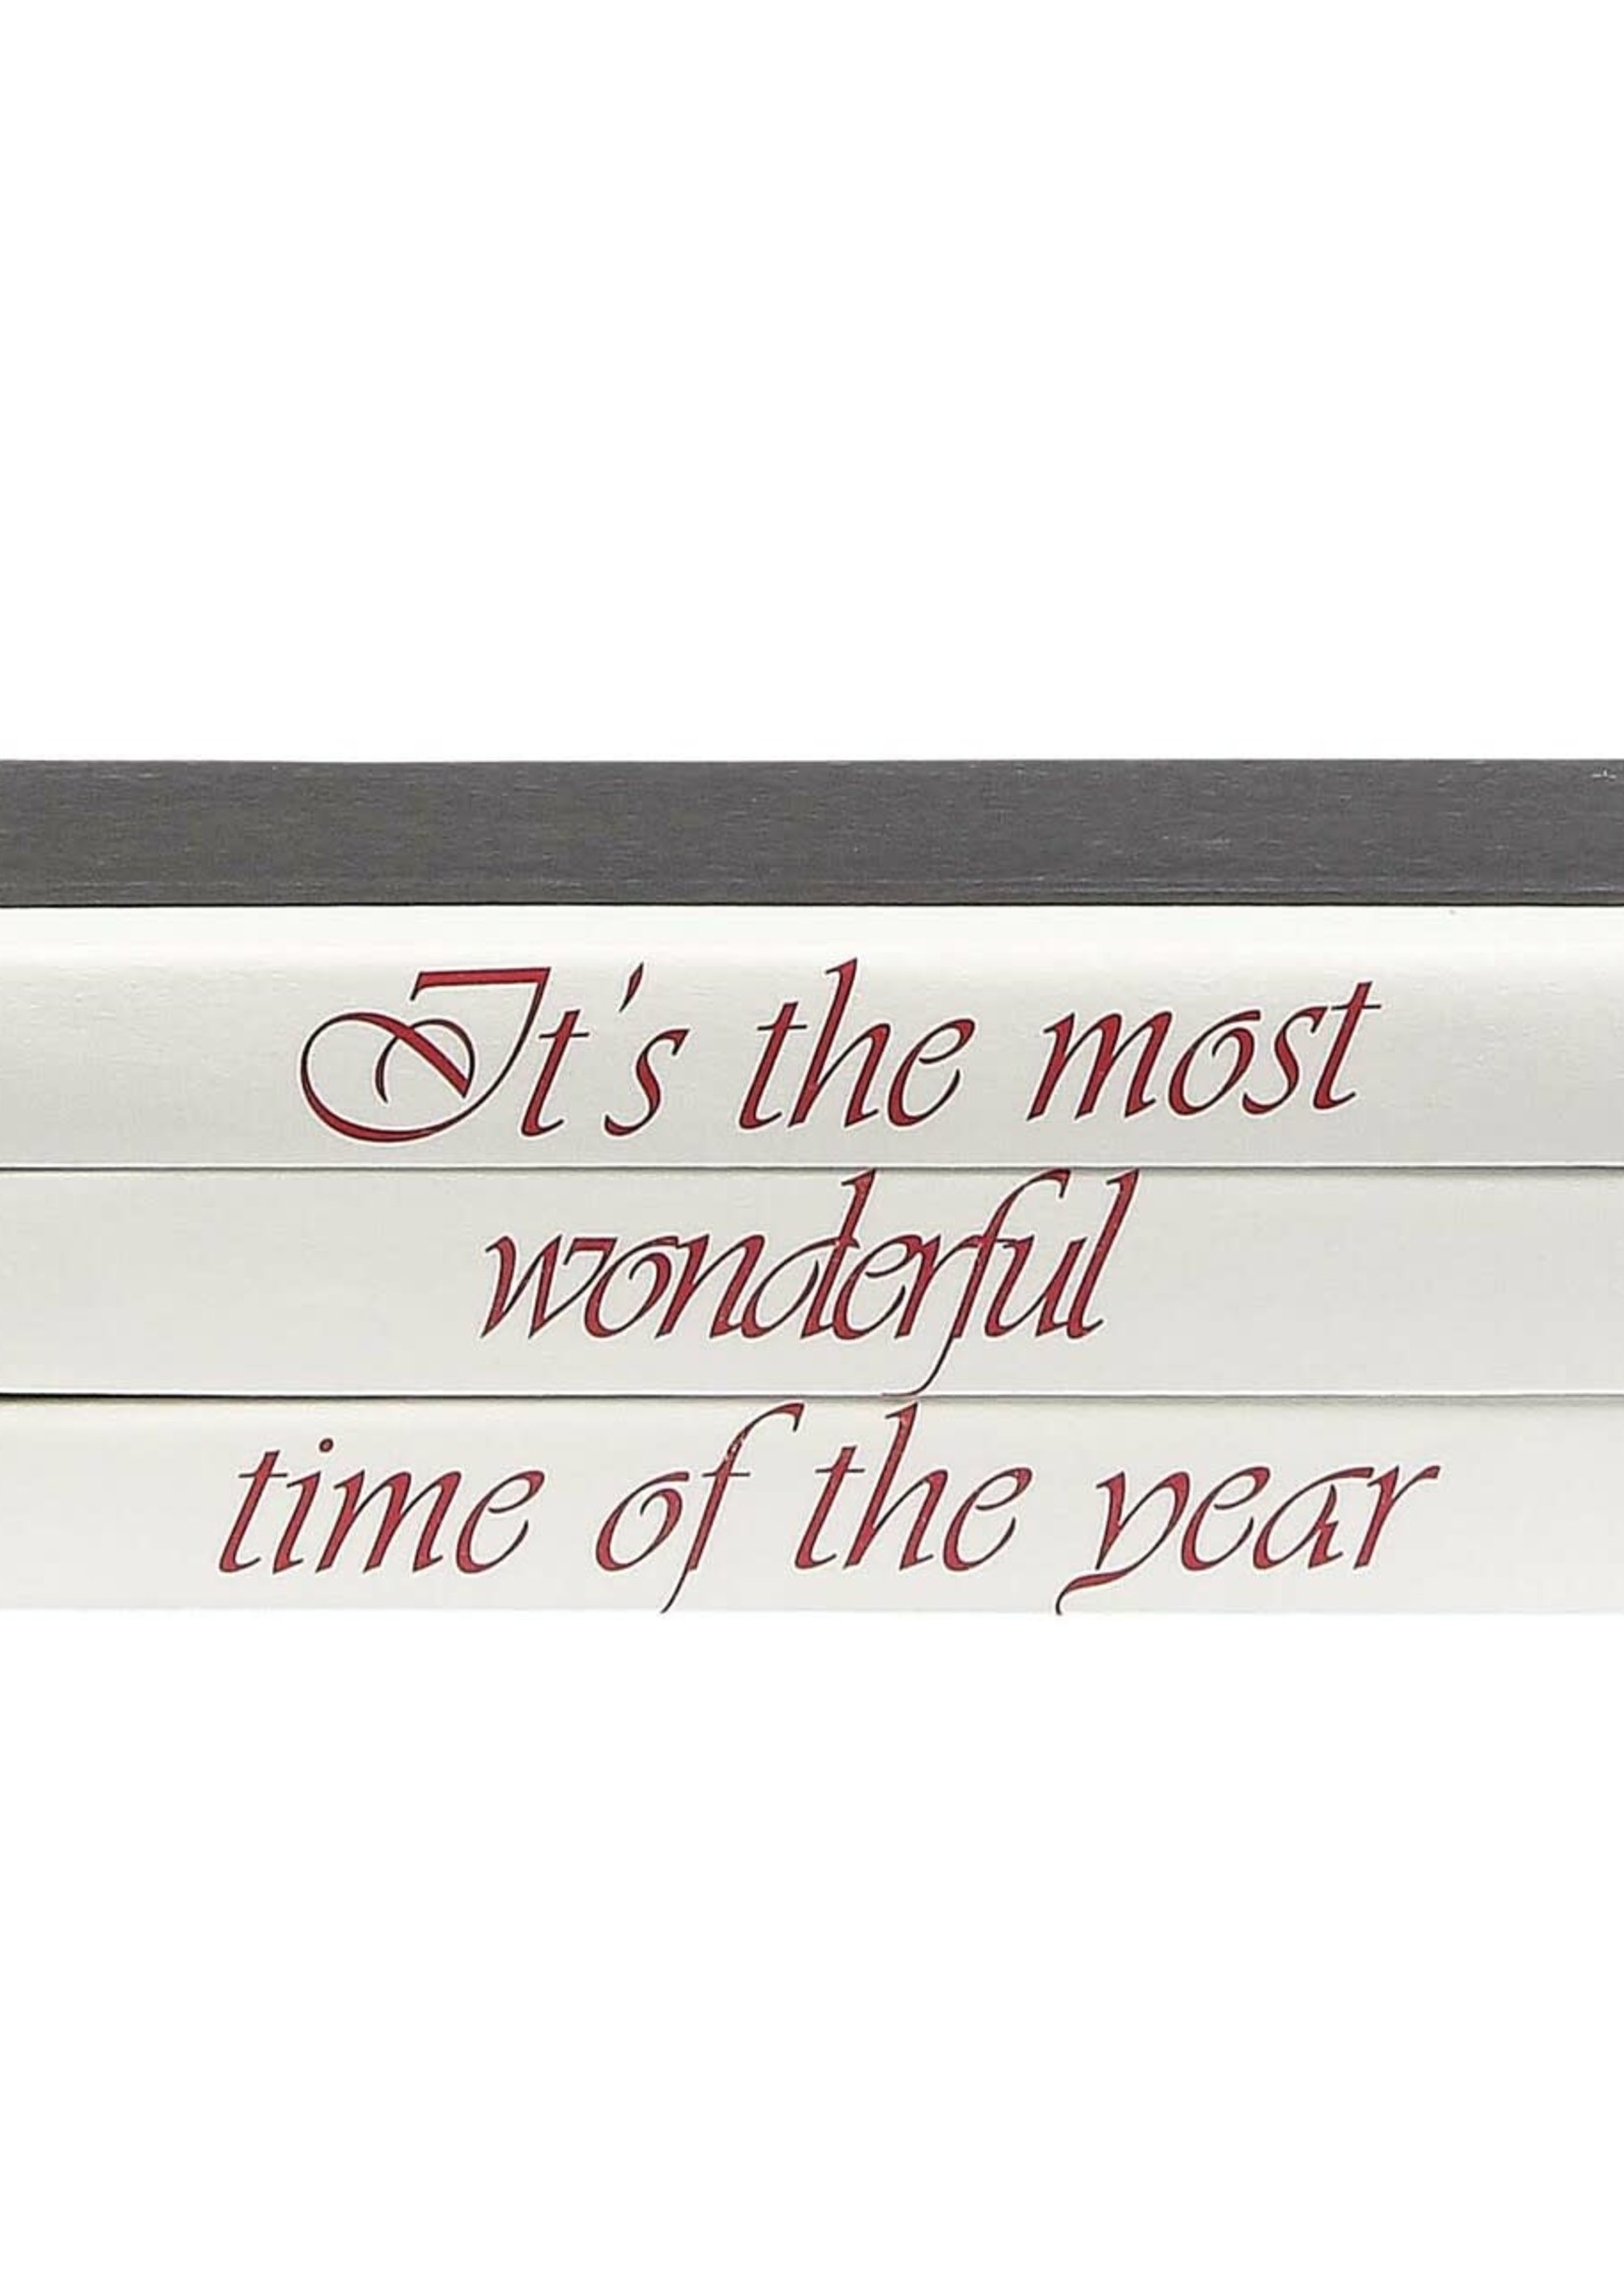 Design Decor 3 Vol- "It's the most wonderful" Quote / Black Cover / 9.5" wide / Approx. 3.75" tall